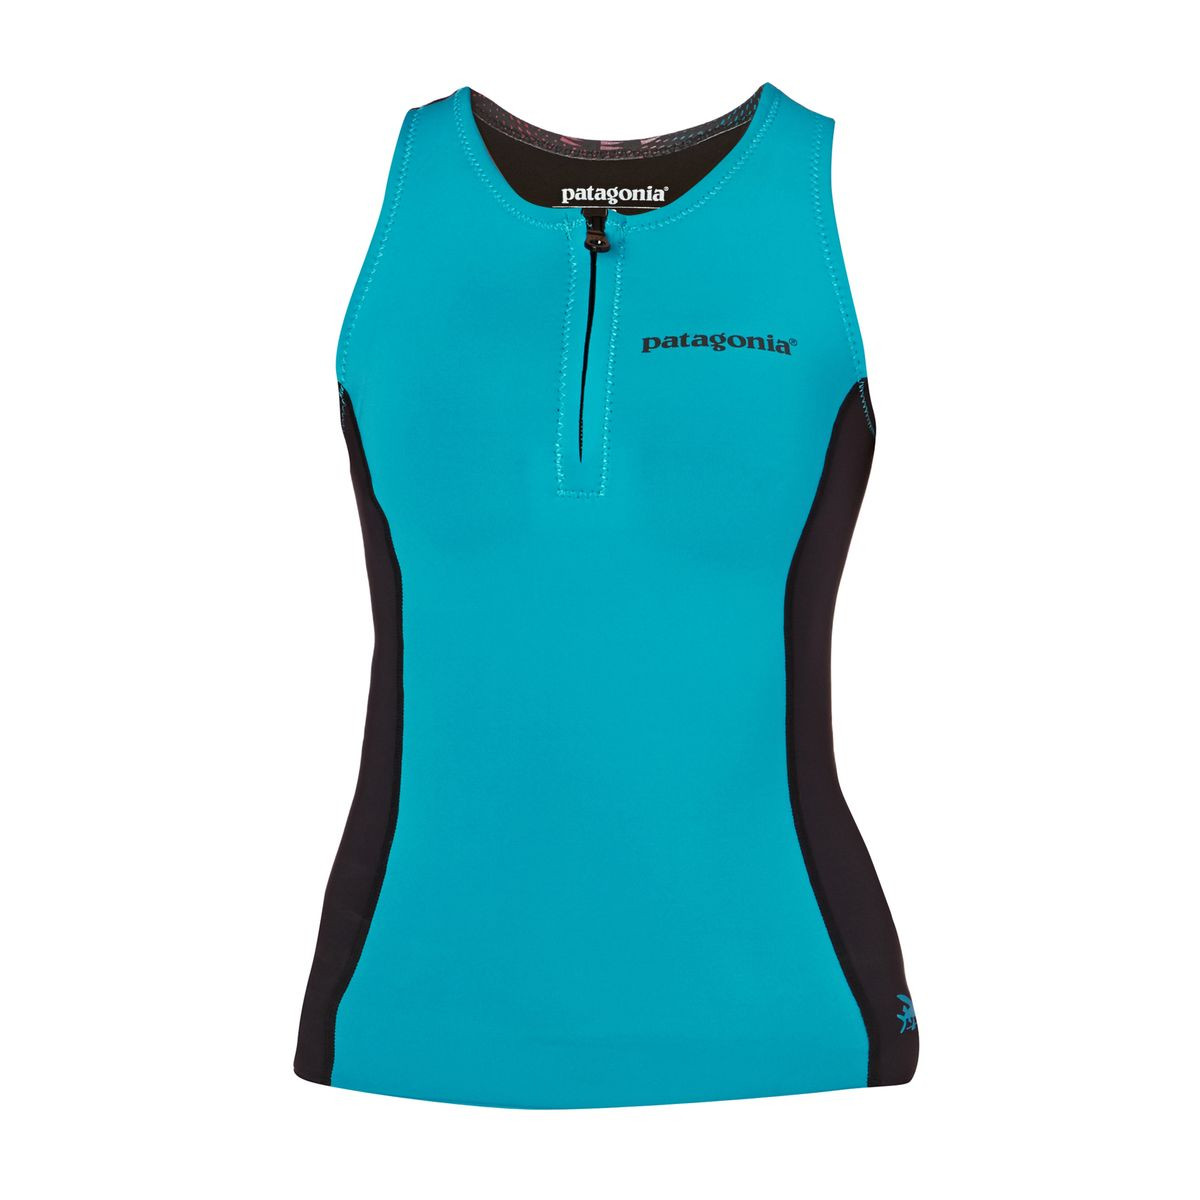 Patagonia Women R1 1.5mm 2017 Wetsuit Vest - Howling Turquoise